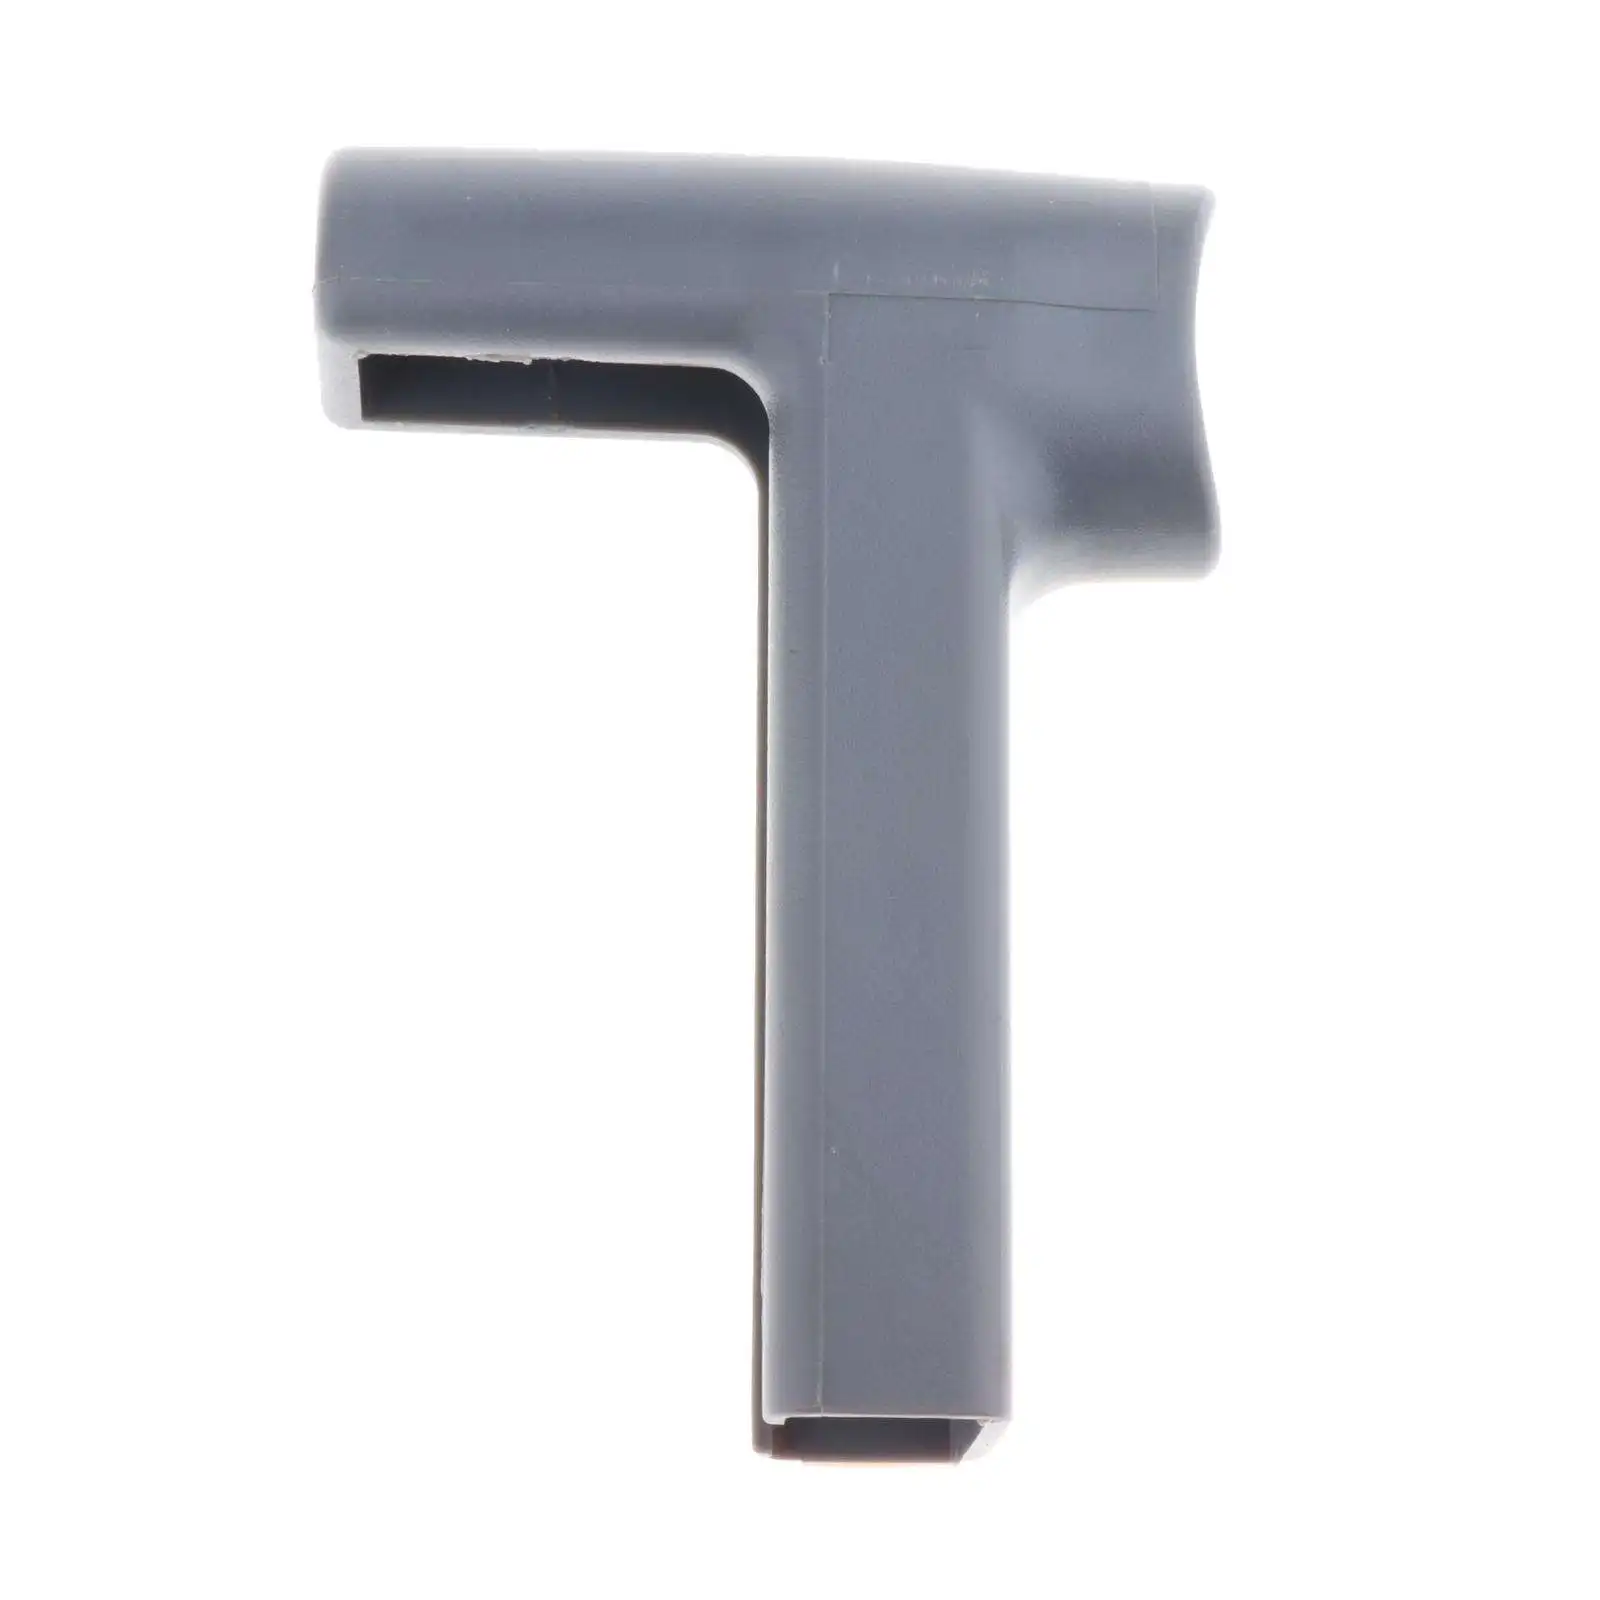 Handle Housing Fit for Yamaha Outboard Motor Remote Control Box 703-48222-00